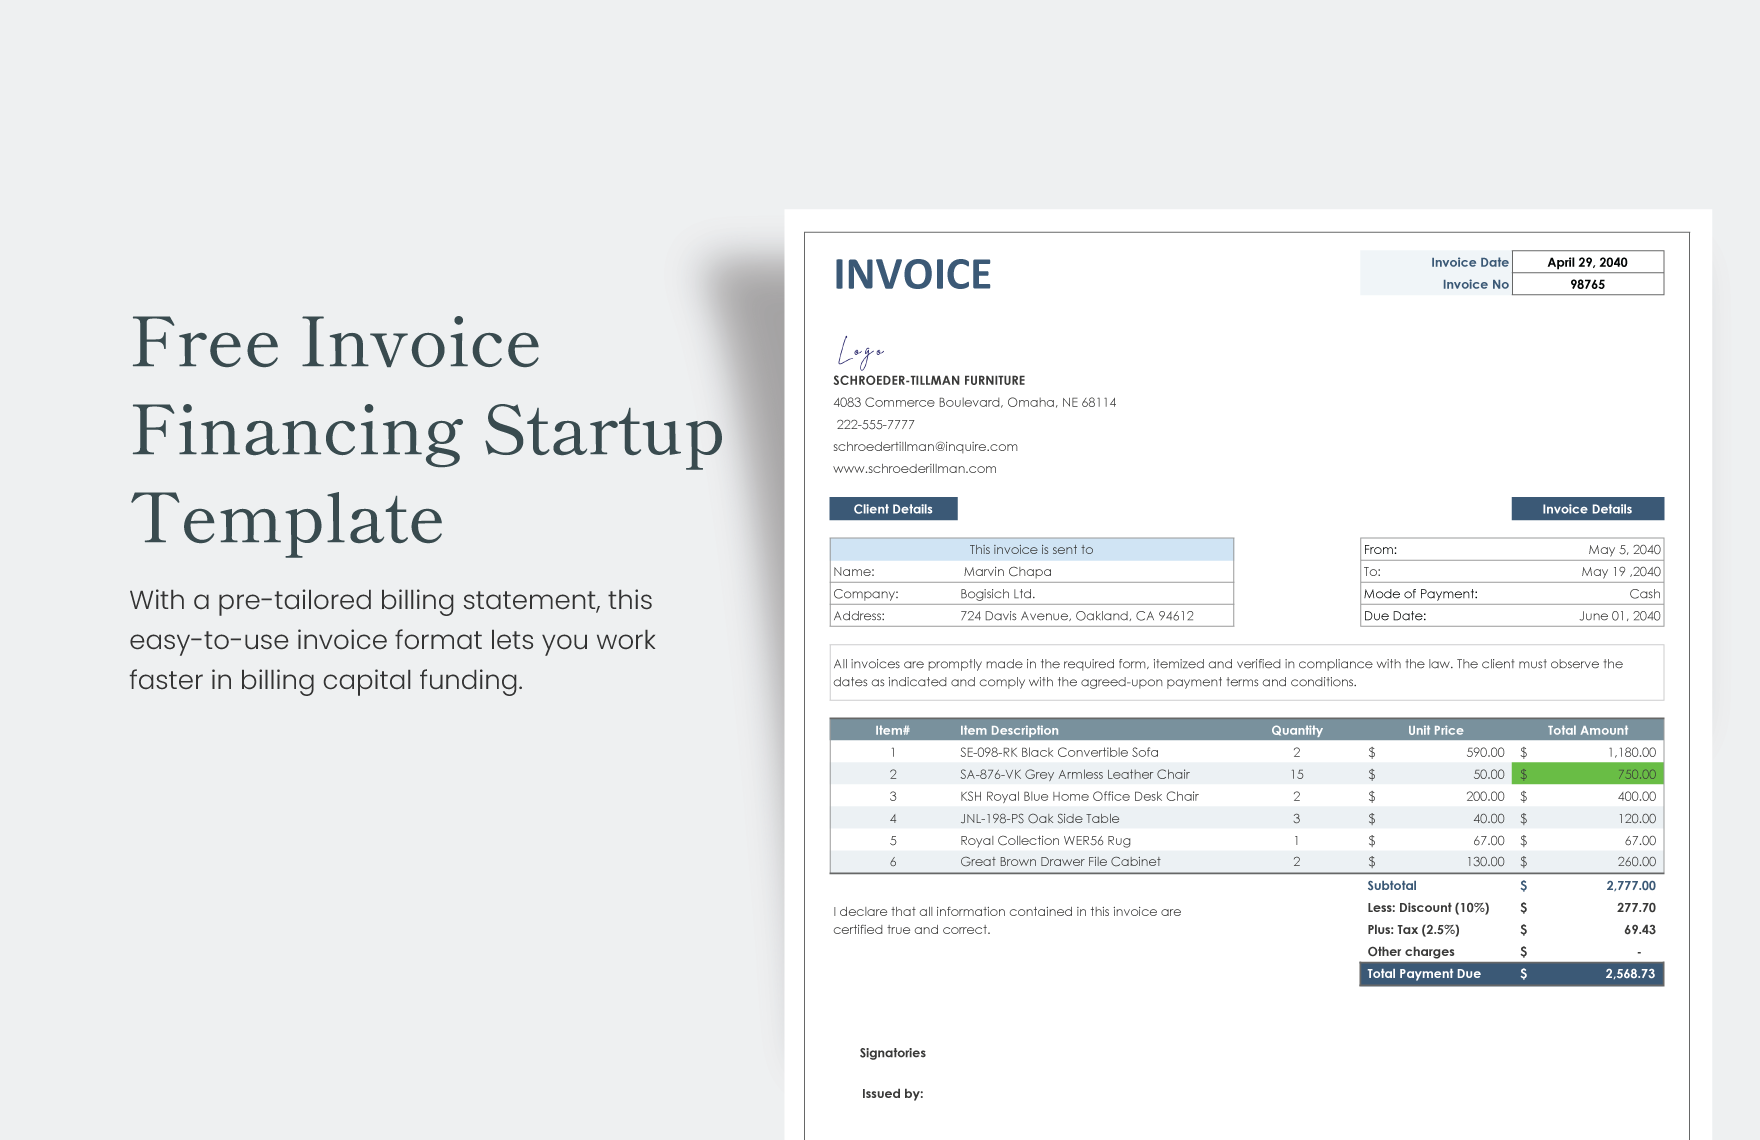 Free Invoice Financing Startup Template Download in Word, Google Docs